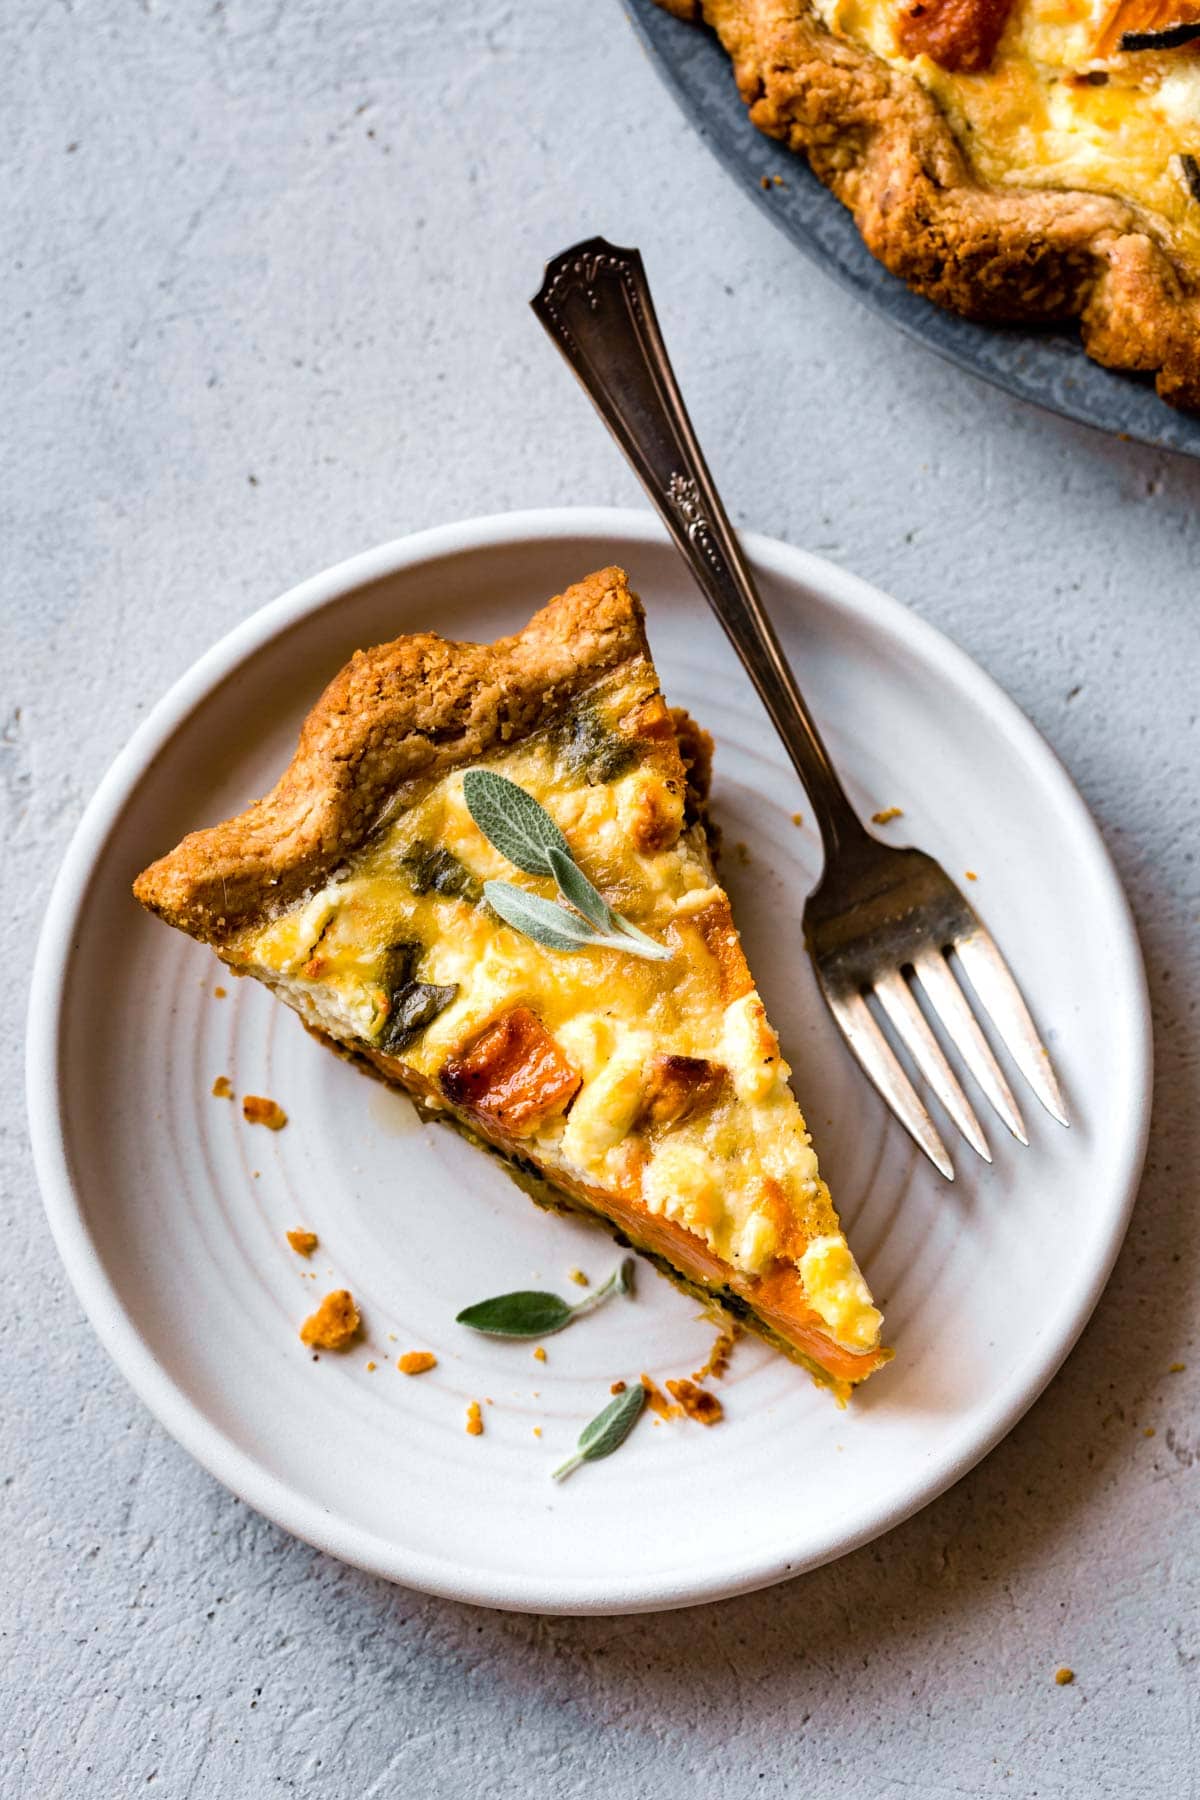 a slice of quiche is on a white plate with a silver vintage fork